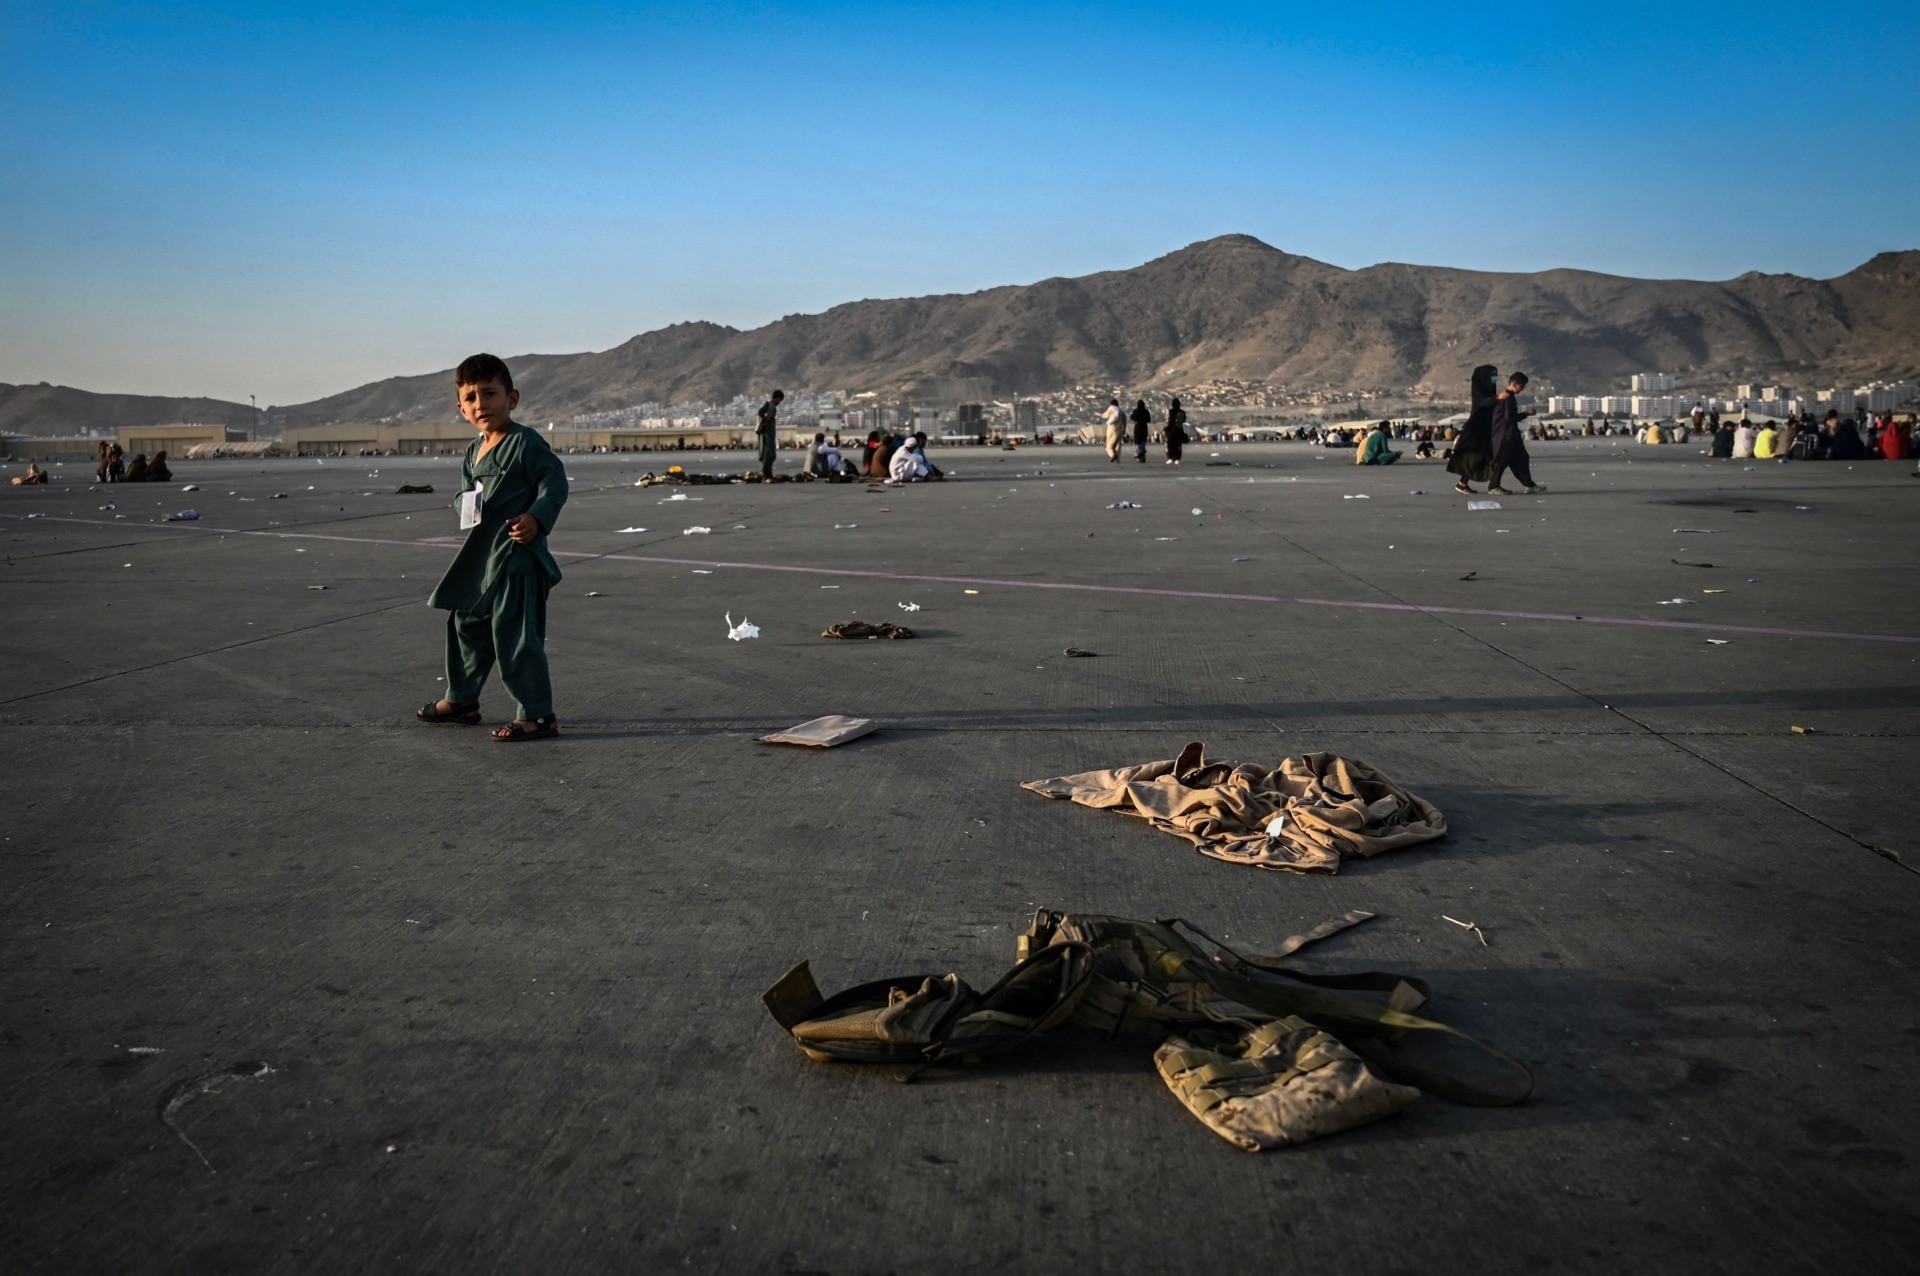 TOPSHOT - An Afghan child walks near military uniforms as he with elders wait to leave the Kabul airport in Kabul on August 16, 2021, after a stunningly swift end to Afghanistan's 20-year war, as thousands of people mobbed the city's airport trying to flee the group's feared hardline brand of Islamist rule. (Photo by Wakil Kohsar / AFP) (Photo by WAKIL KOHSAR/AFP via Getty Images)